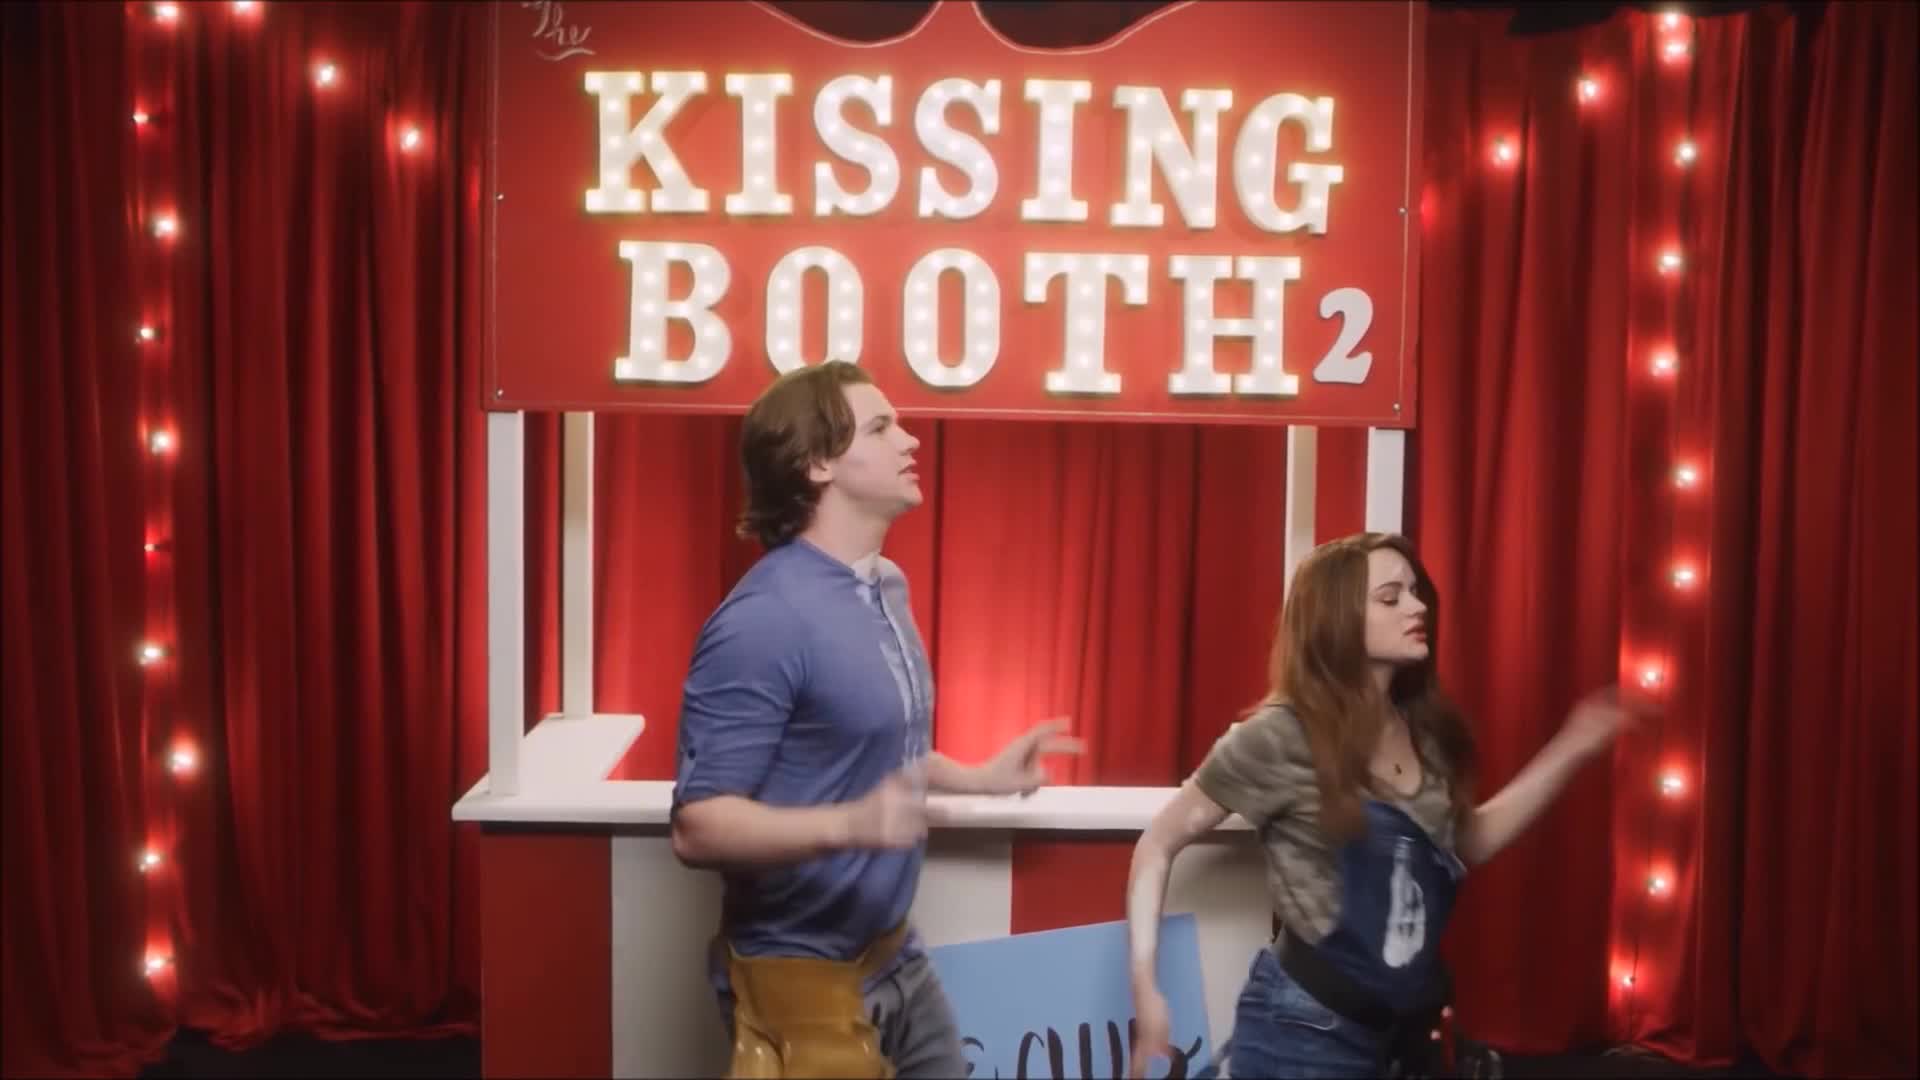 Watch: The Kissing Booth 2 trailer